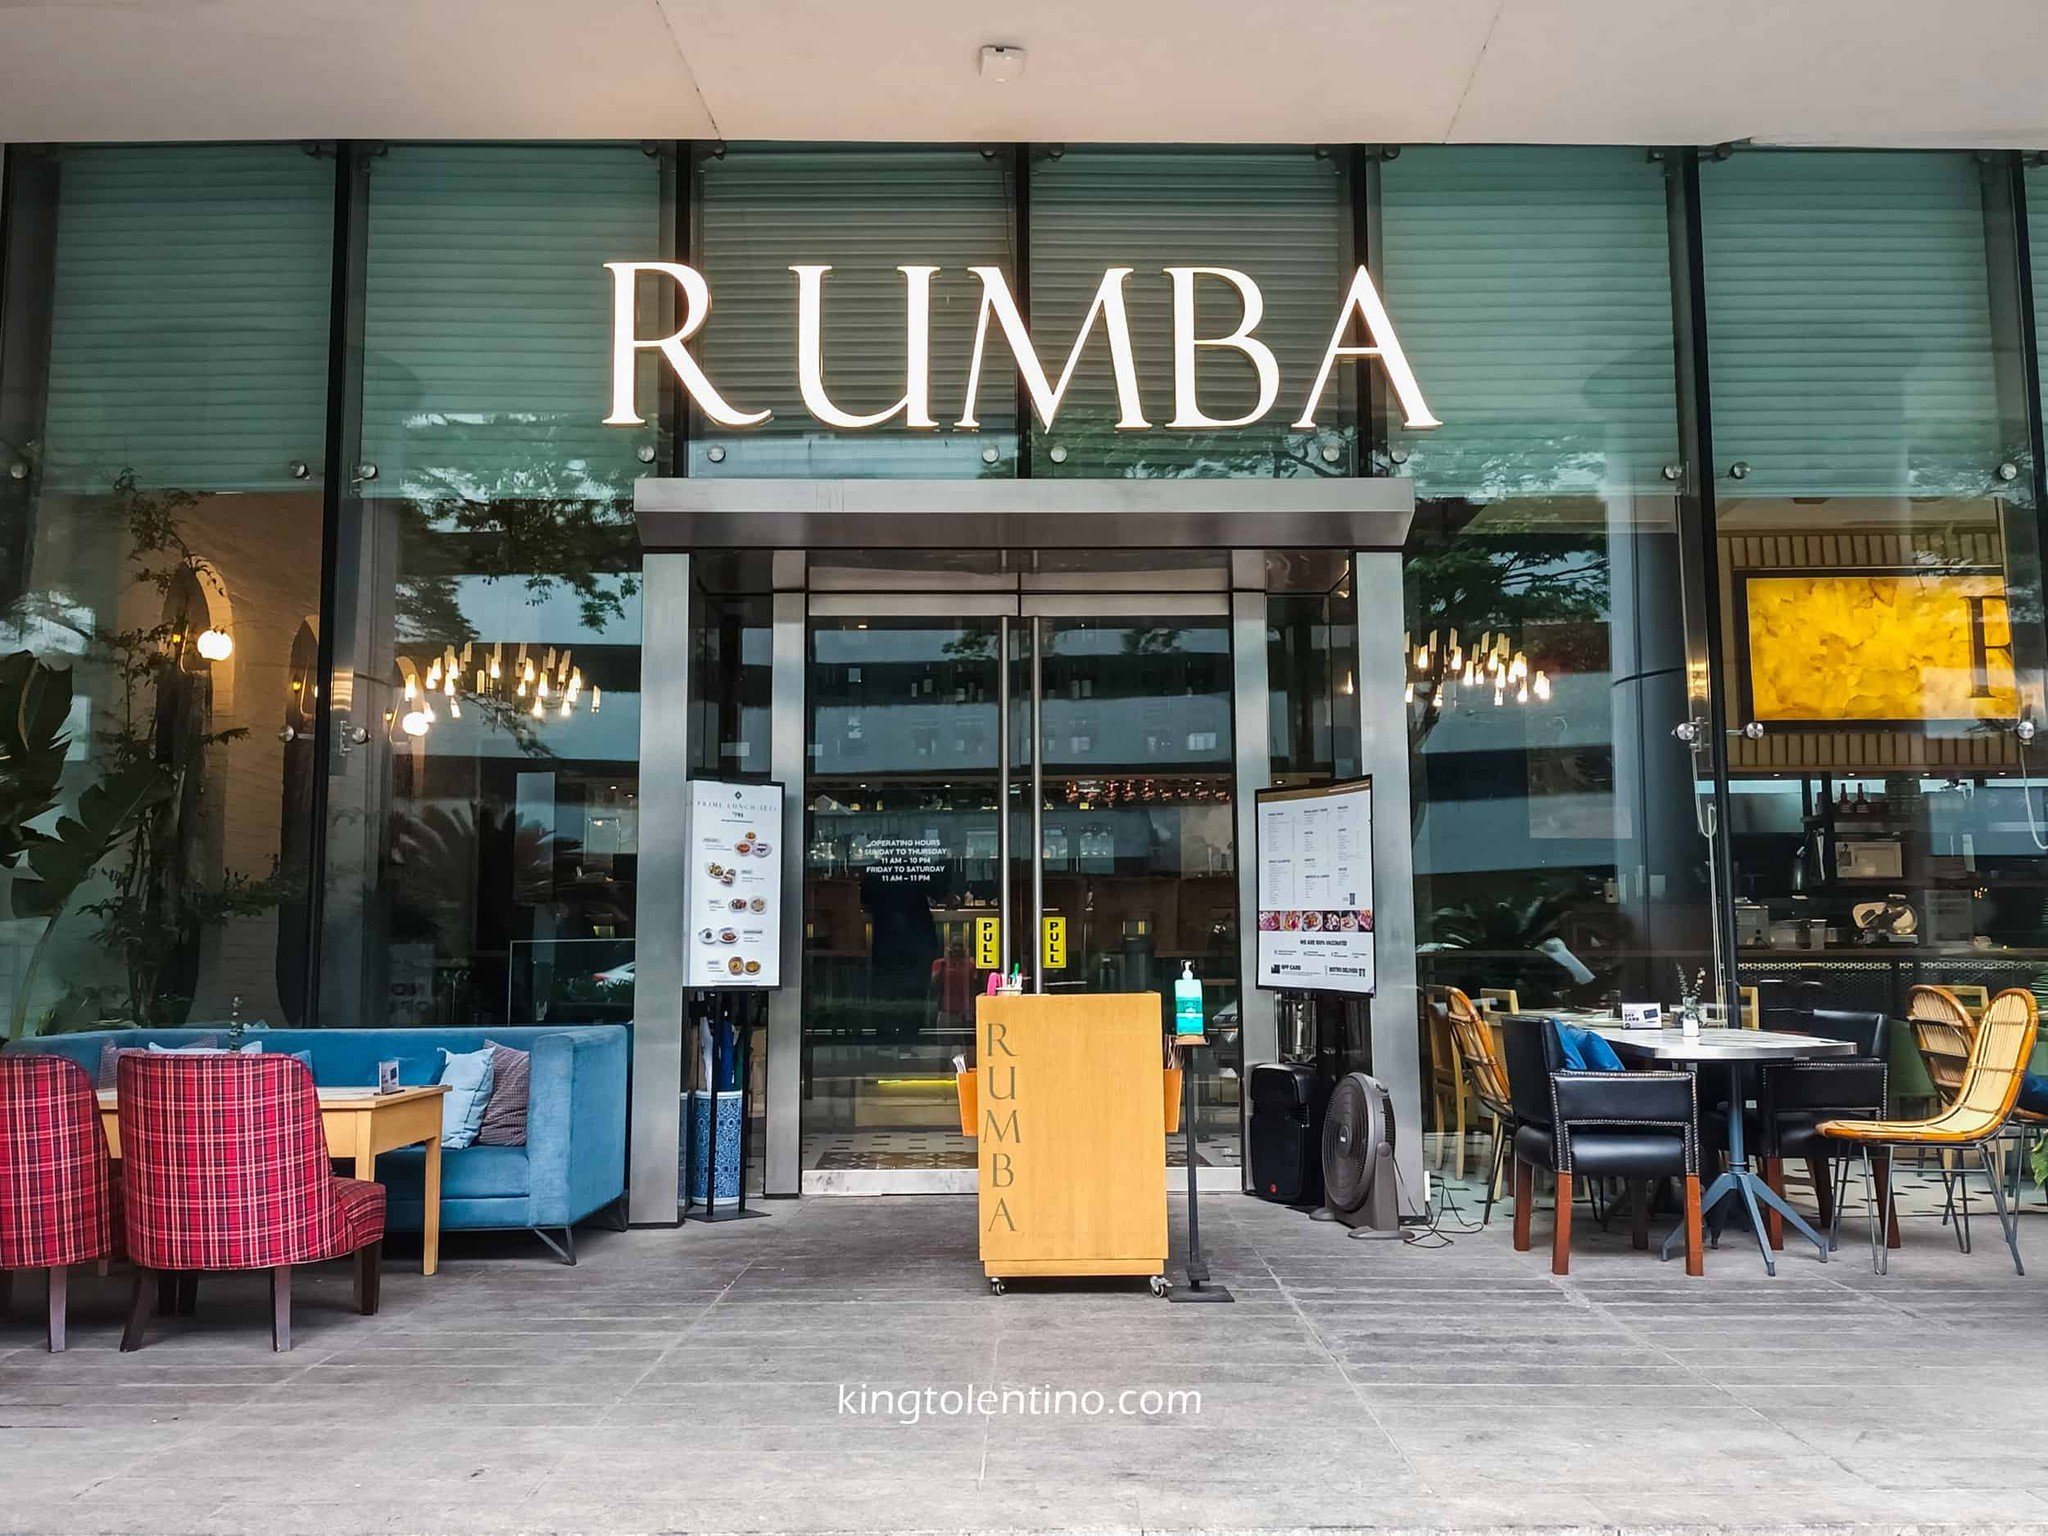 Mediterranean Restaurant at The Shops at Ayala Triangle, Makati
Rumba 

https://www.kingtolentino.com/blog/rumba

====
Let's Connect
====
Website: https://www.kingtolentino.com
Youtube: https://www.youtube.com/KingTolentino
Facebook: https://www.face